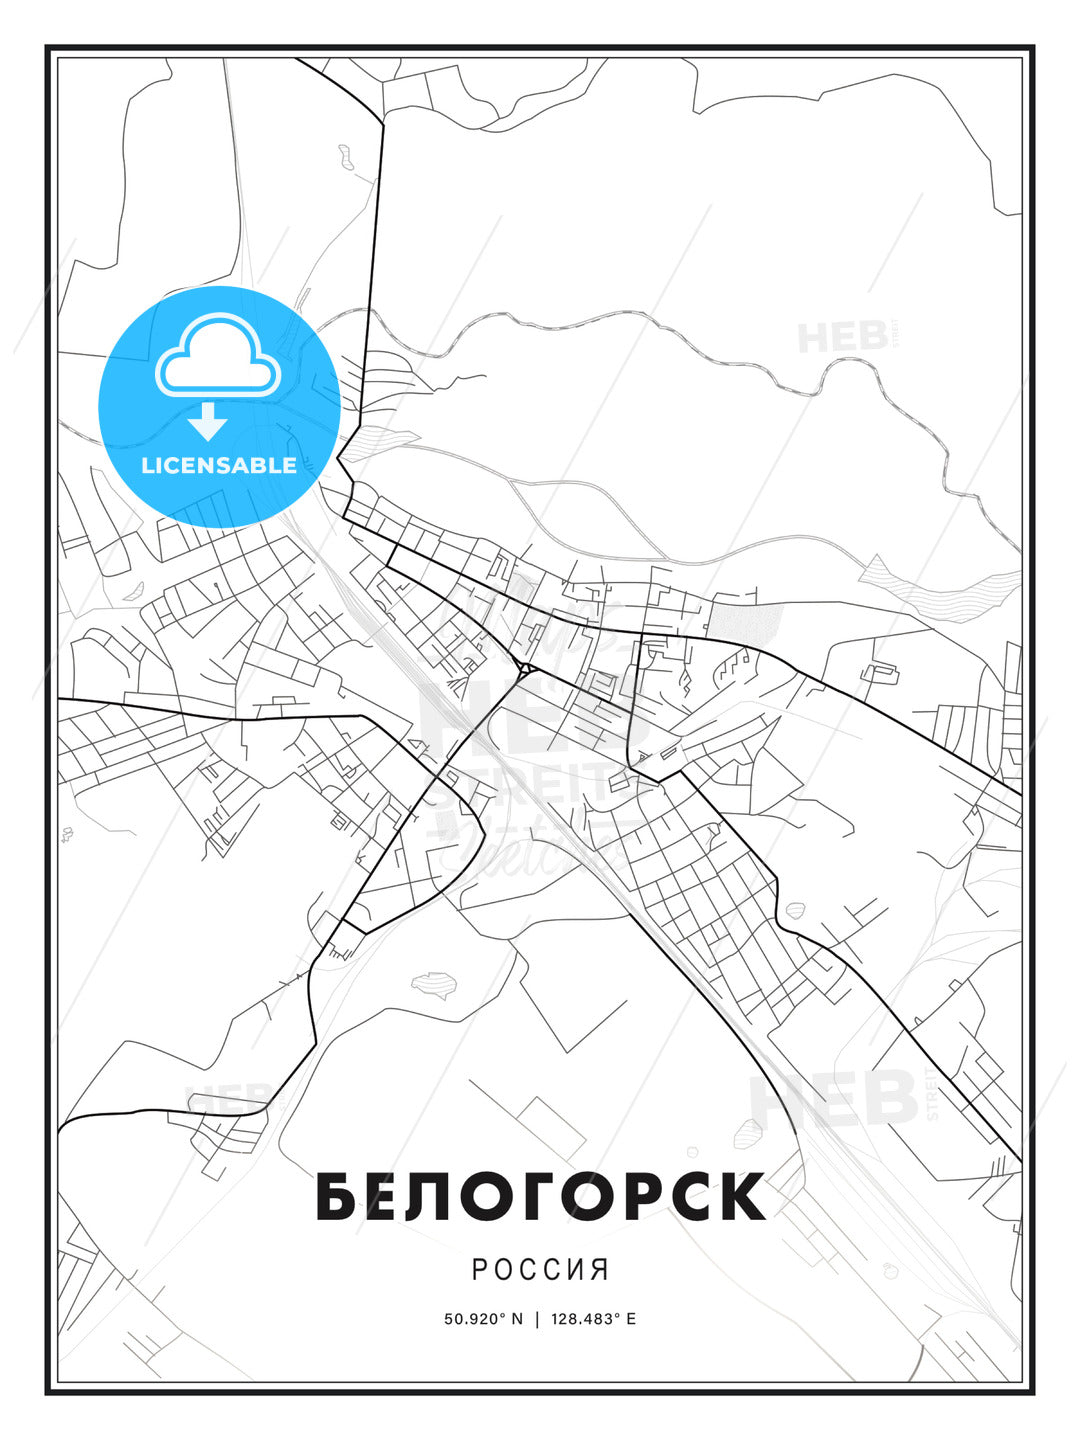 БЕЛОГОРСК / Belogorsk, Russia, Modern Print Template in Various Formats - HEBSTREITS Sketches